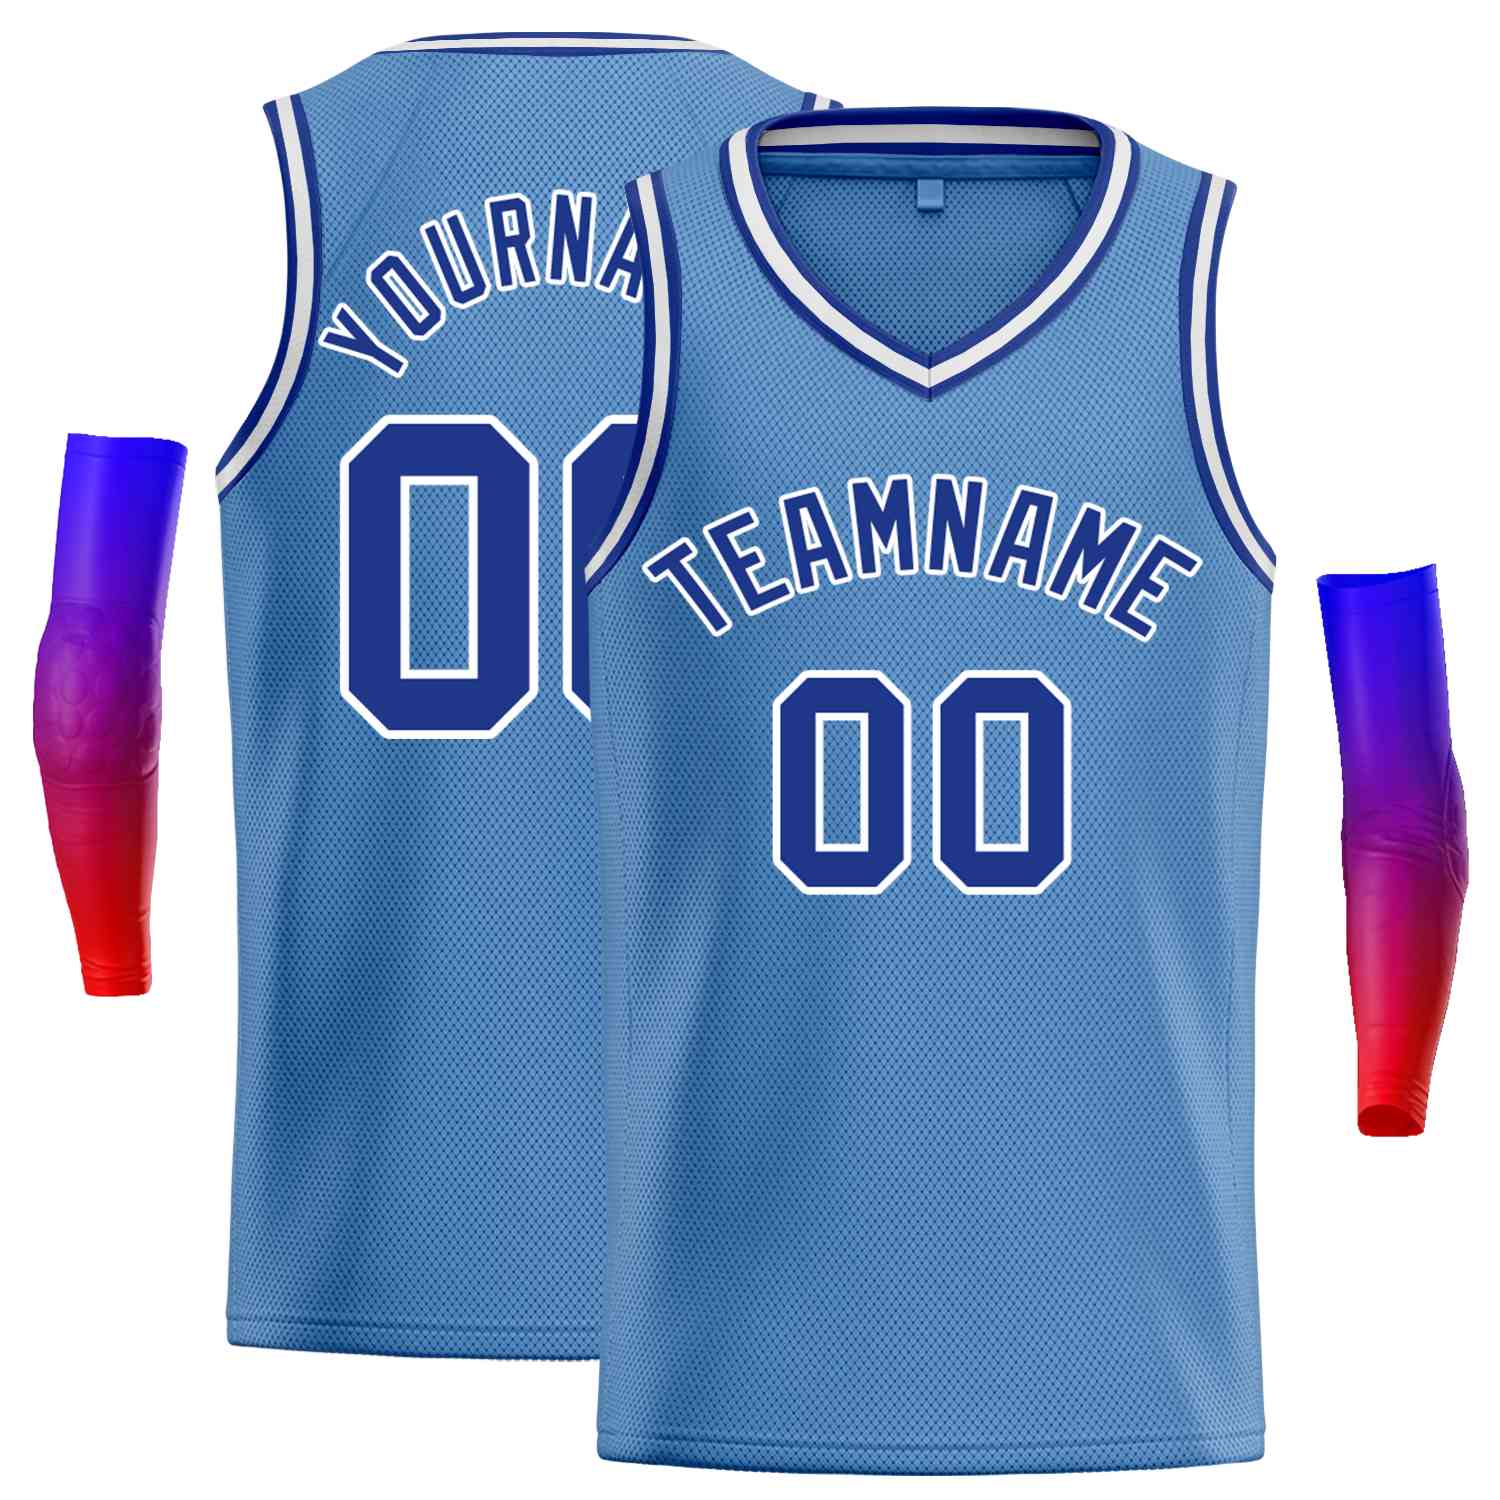 Teal Gradient Team Basketball Uniforms Wholesale | YoungSpeeds Mens